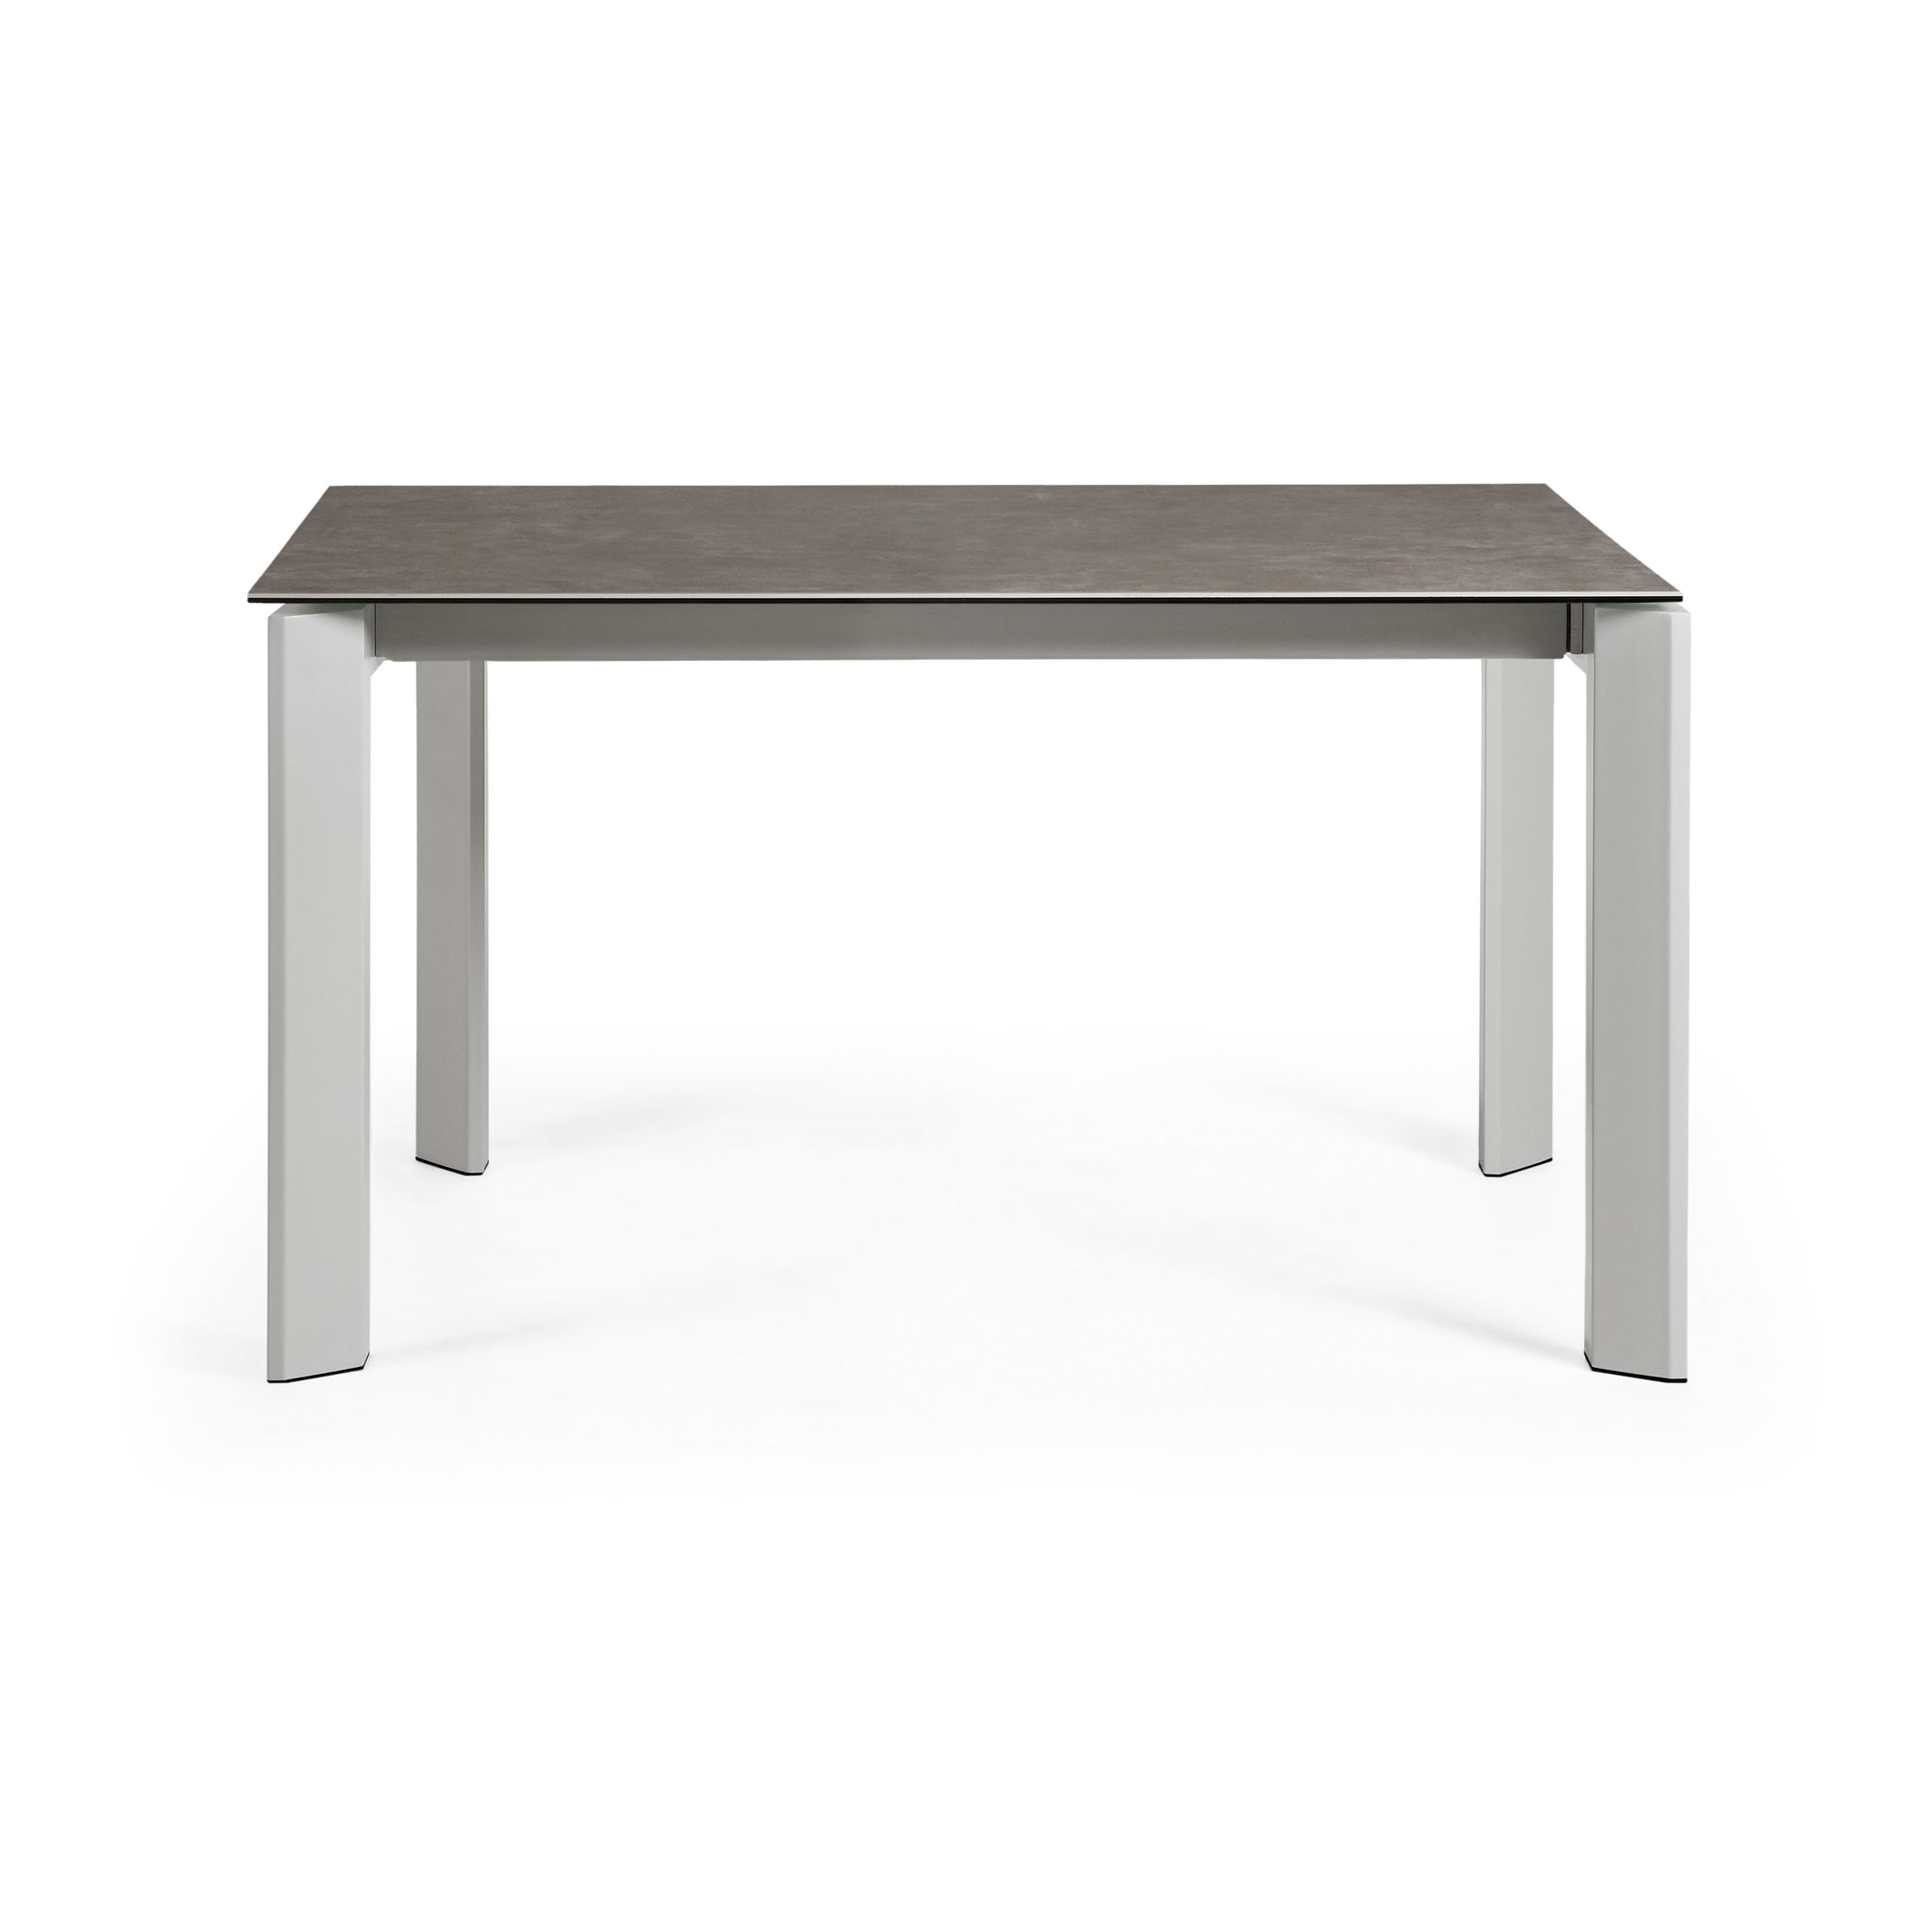 Axis porcelain extendable table Vulcano Ash finish and gray steel legs 140 (200) cm